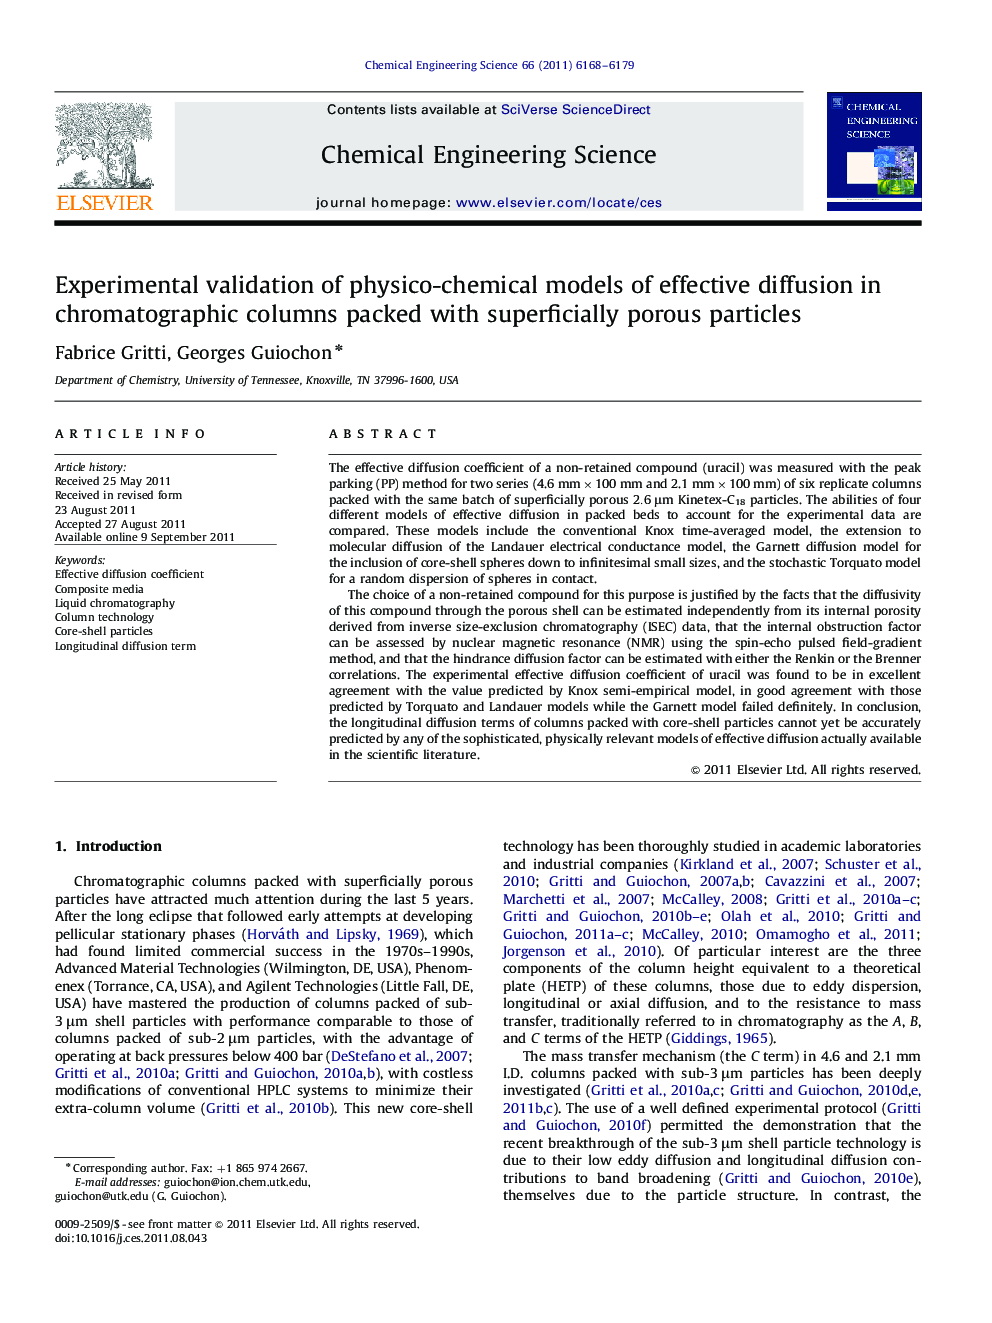 Experimental validation of physico-chemical models of effective diffusion in chromatographic columns packed with superficially porous particles